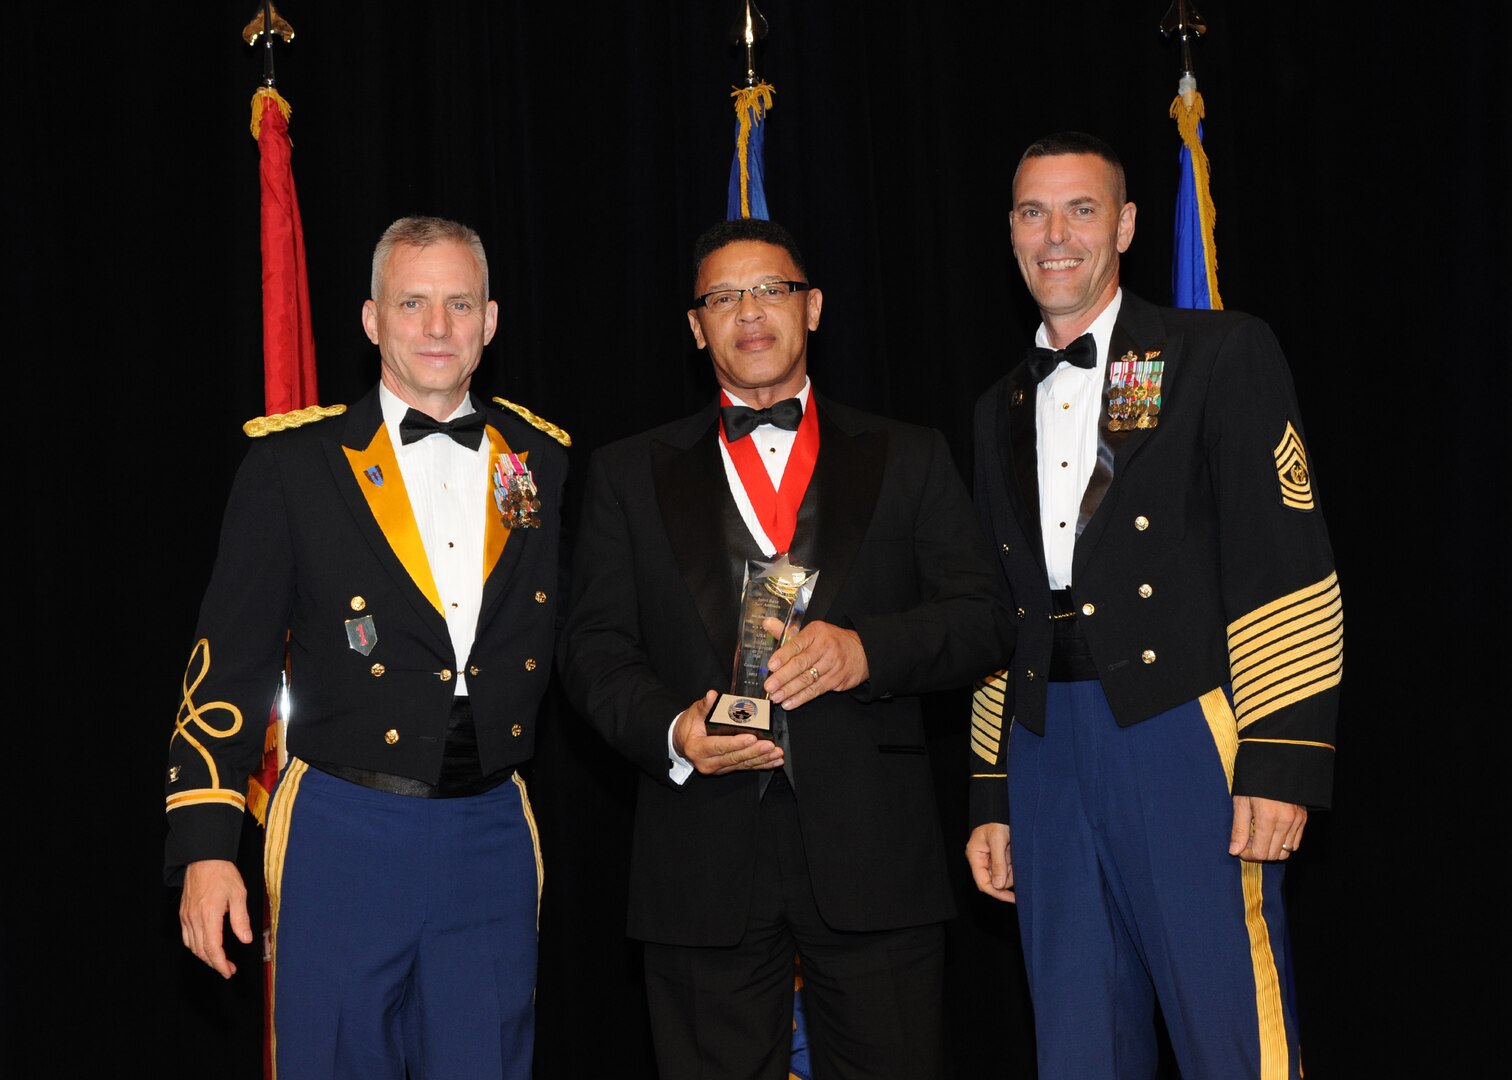 Representing the Army for award presentations during the Joint Base San Antonio Annual Awards Banquet March 29 are Army Col. Jim Chevallier, left, and Command Sgt. Maj. Bryan Witzel, right.  Johnny Gray from Army Support Activity Center, center, received the Civilian Non-Supervisory Category II of the Year Award. (U.S. Air Force photo by Melissa Peterson)